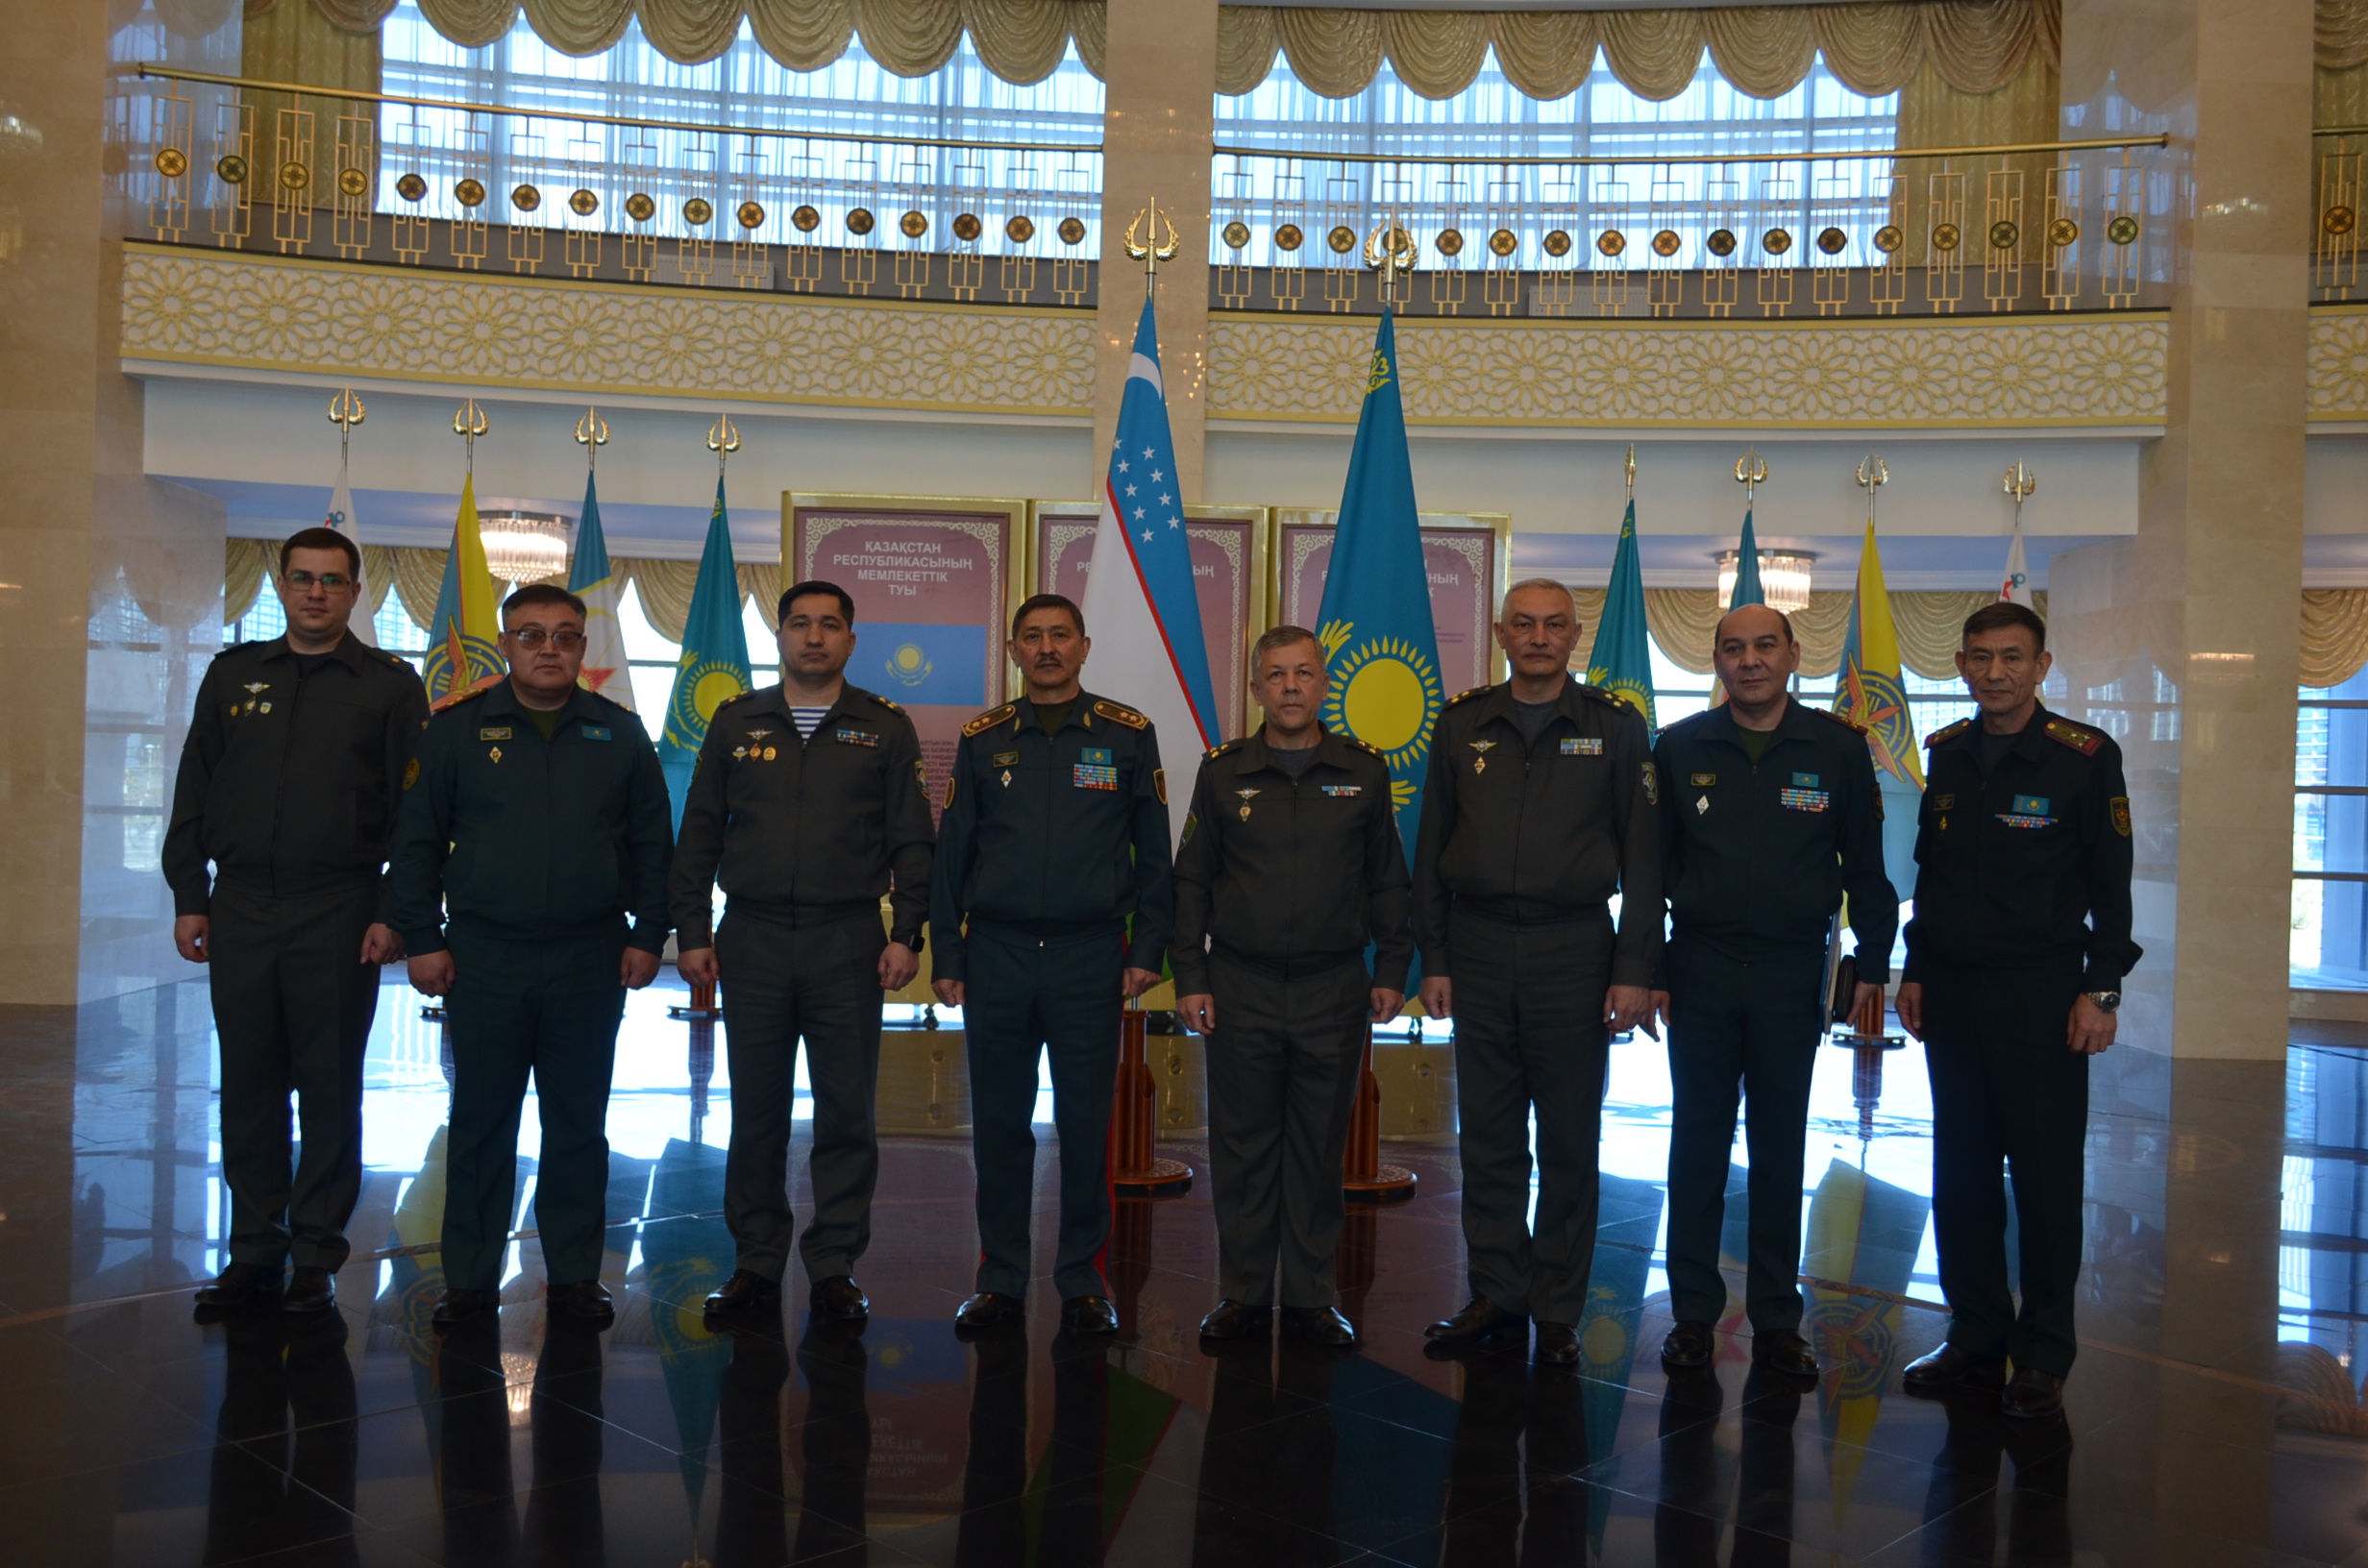 Colleagues from Uzbekistan visited the National Defence University